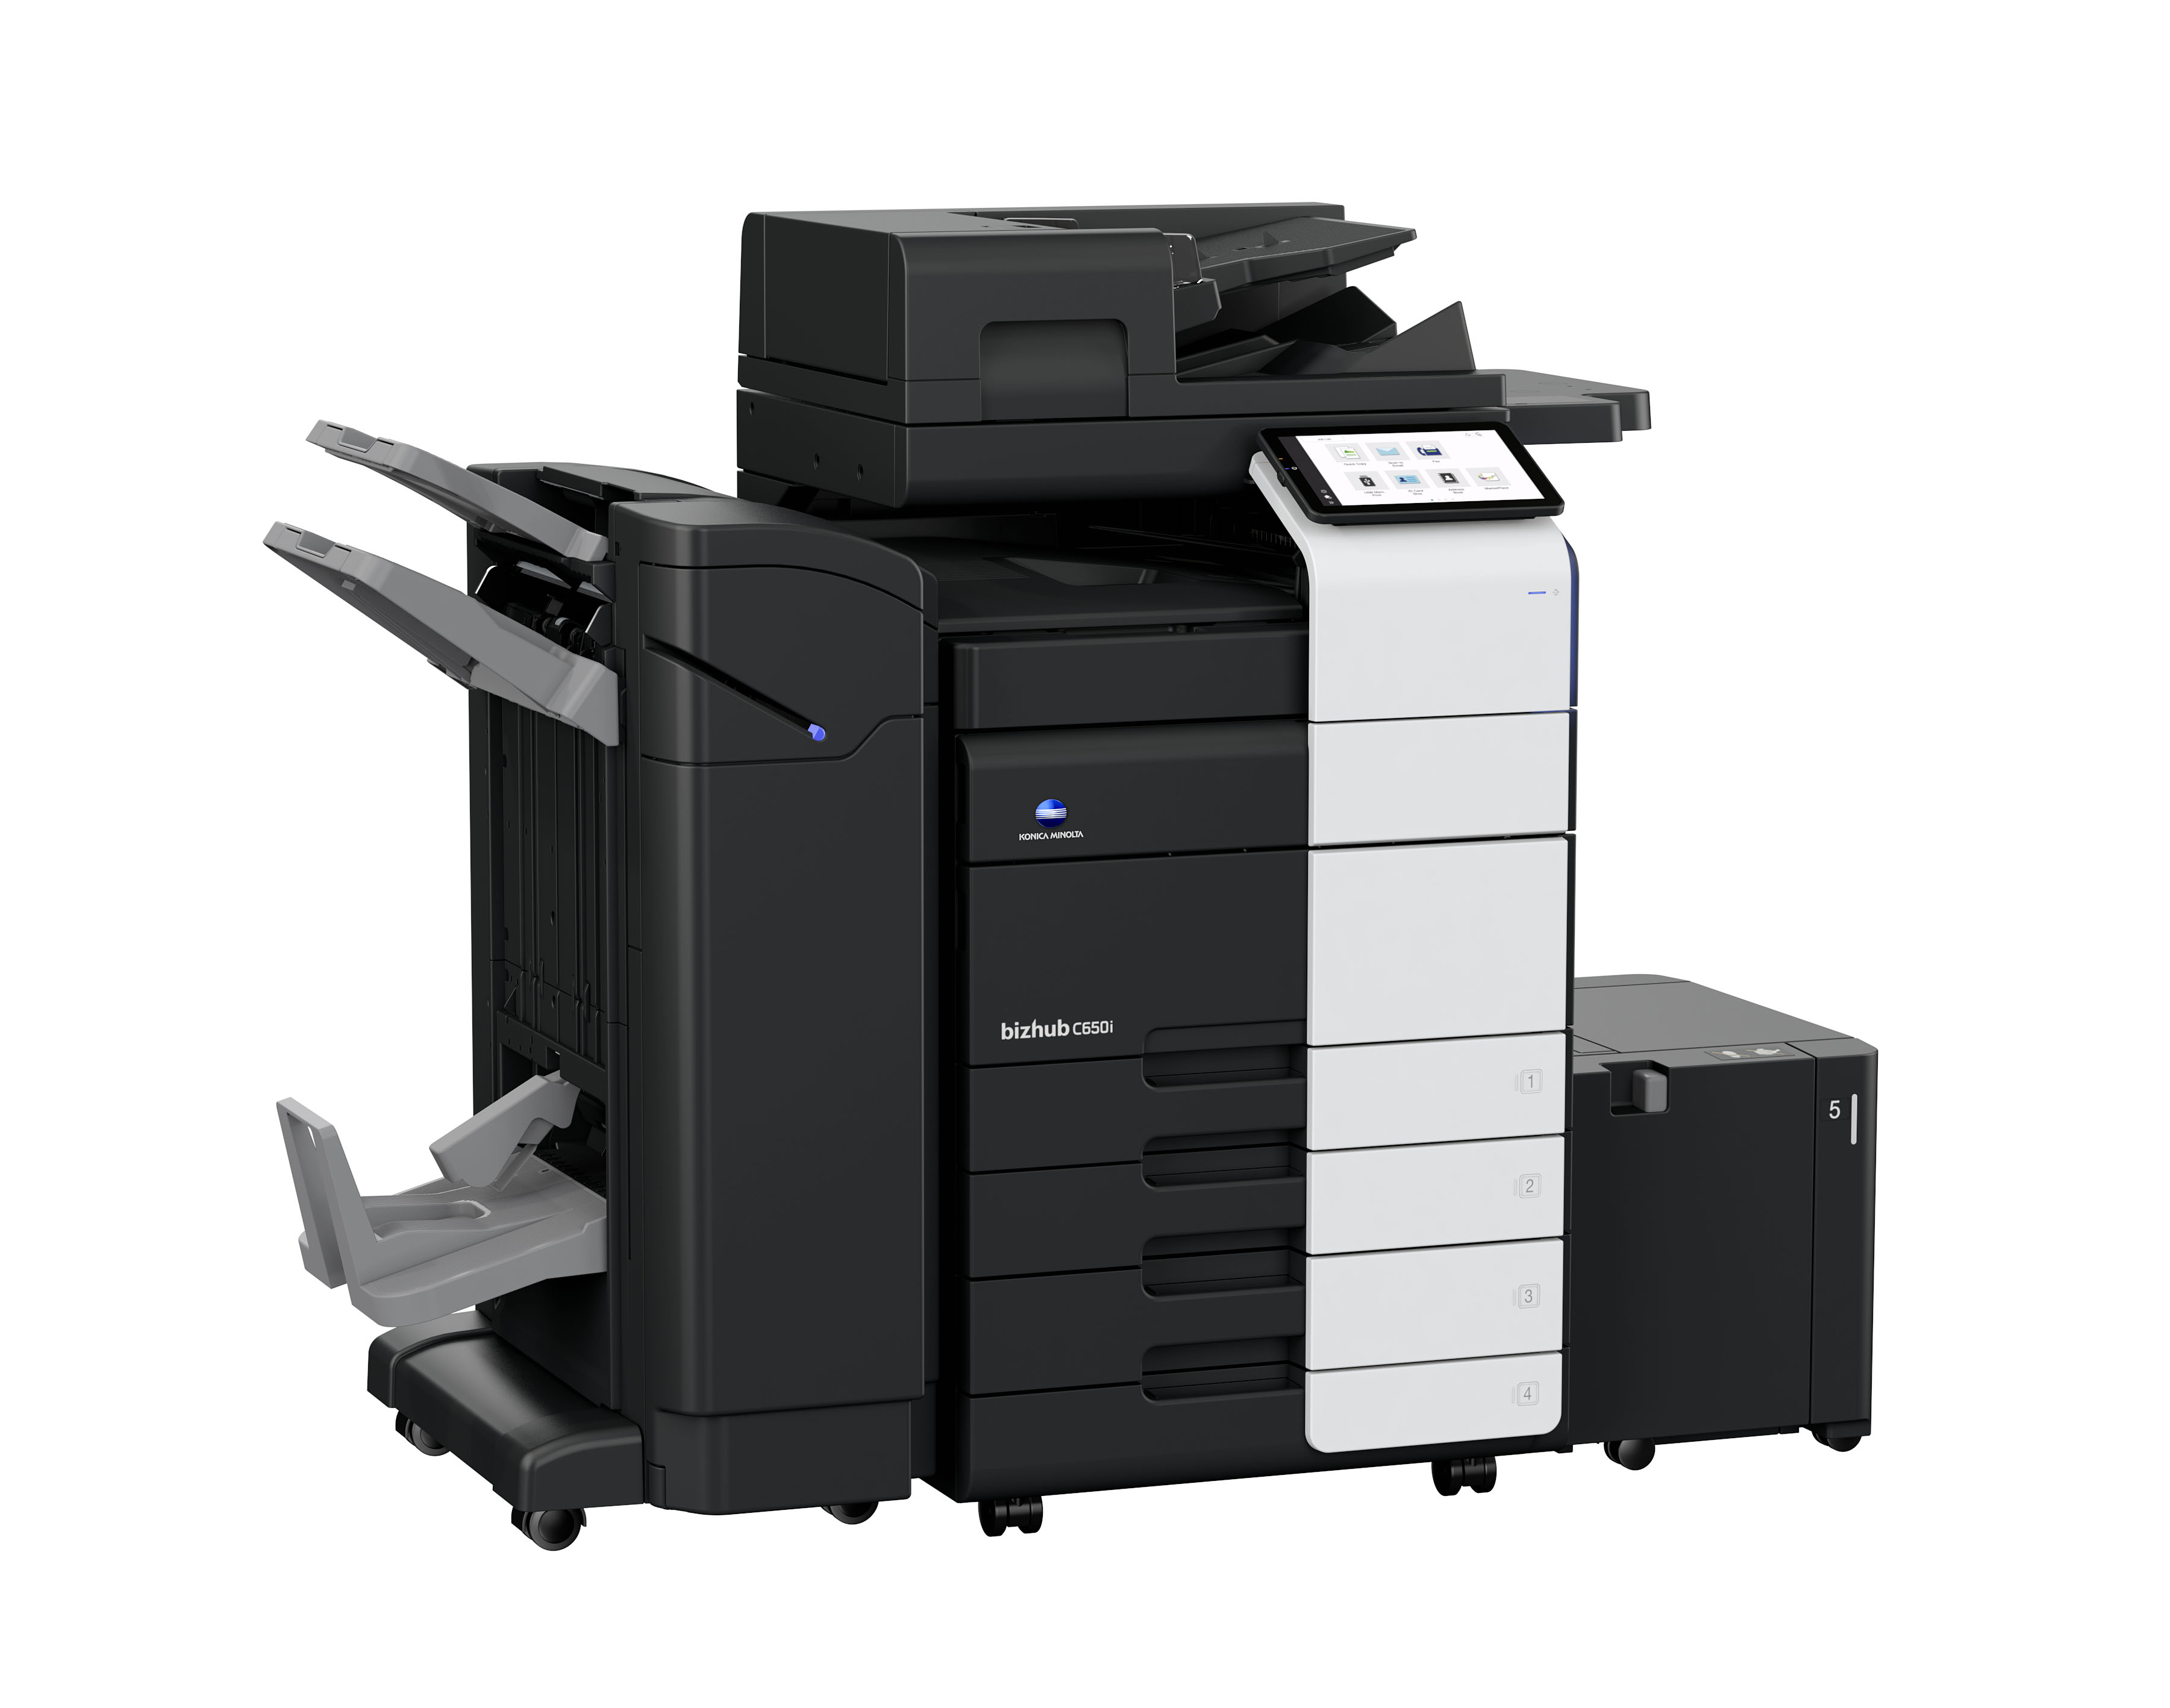 Konica Minolta's bizhub C650i. The company ranked #1 in the MFP Copier Category in Brand Keys’ Customer Loyalty Engagement Index for the 14th consecutive year.